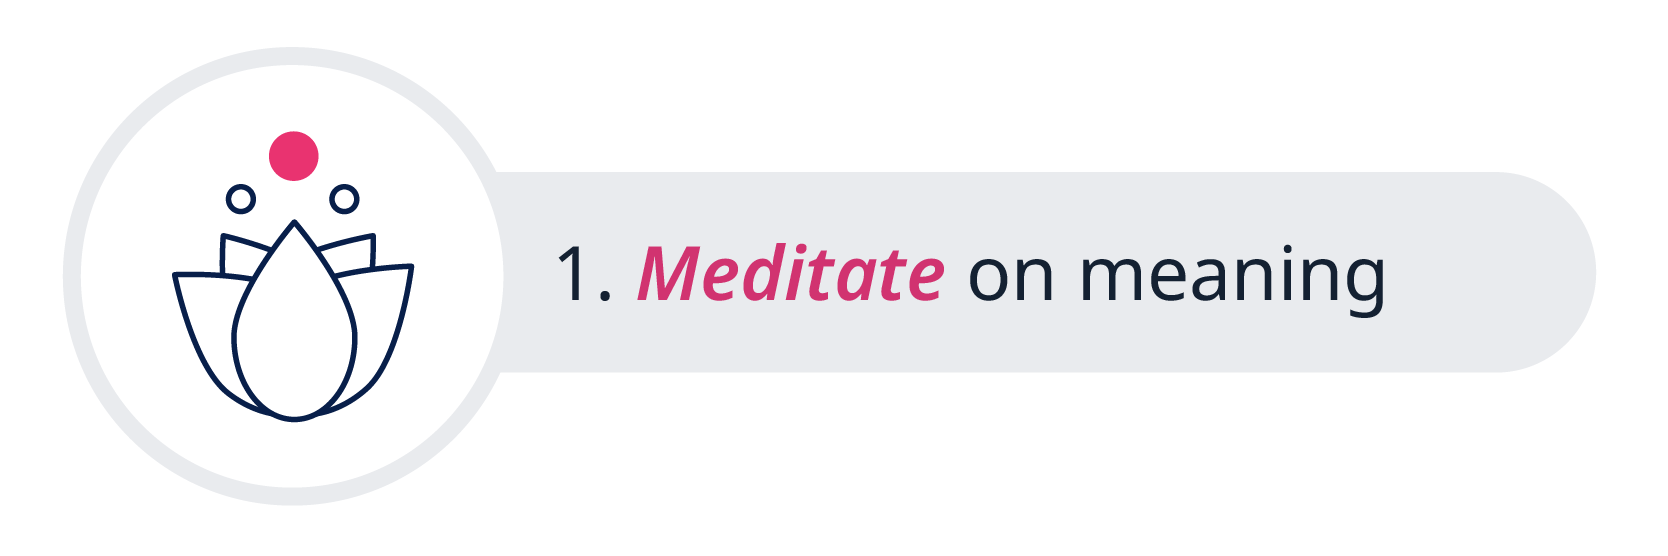 1. Meditate on meaning